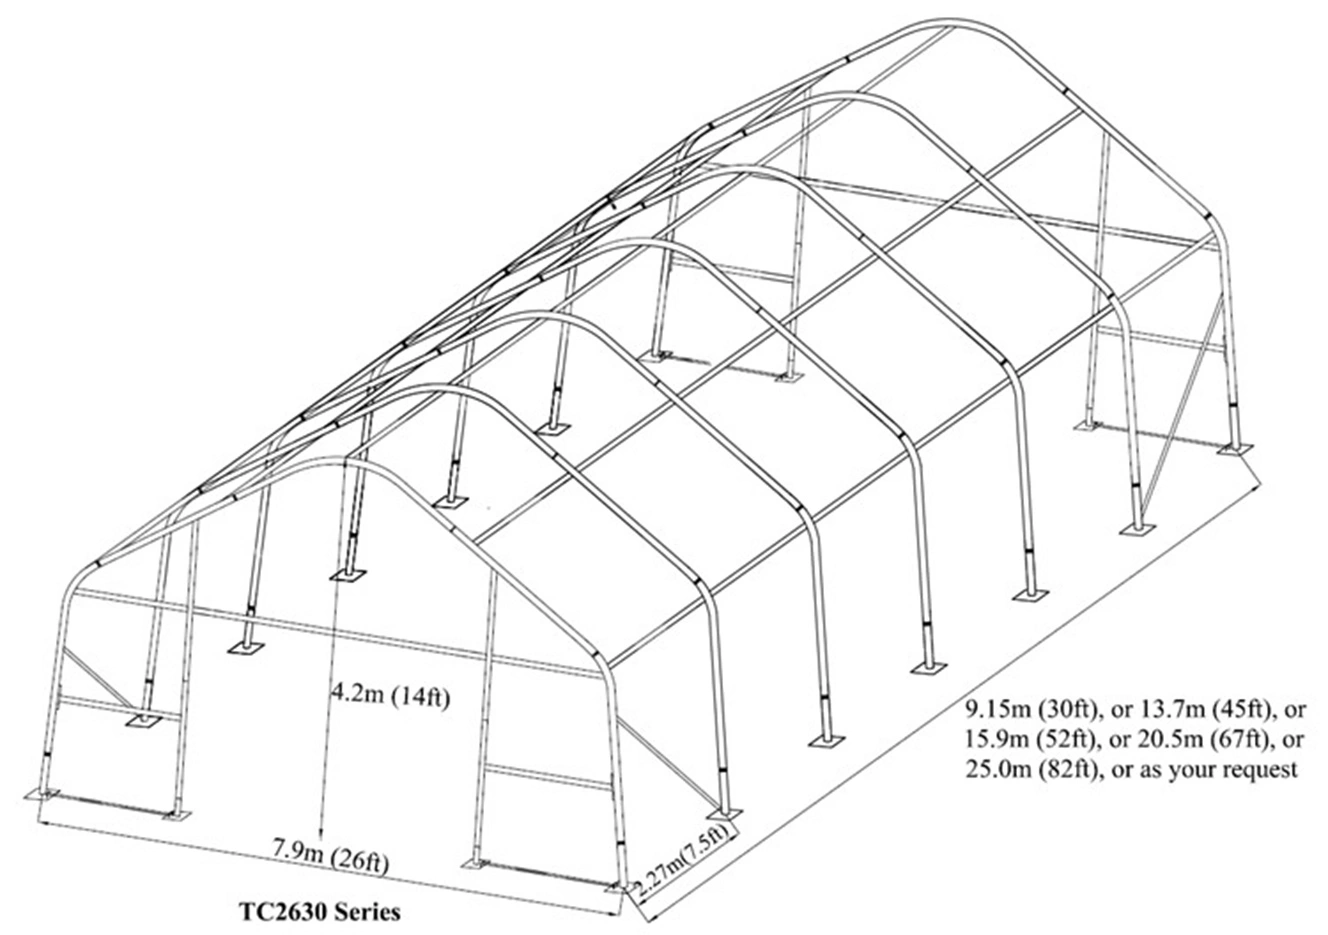 sketch of TC2630 series portable shelter